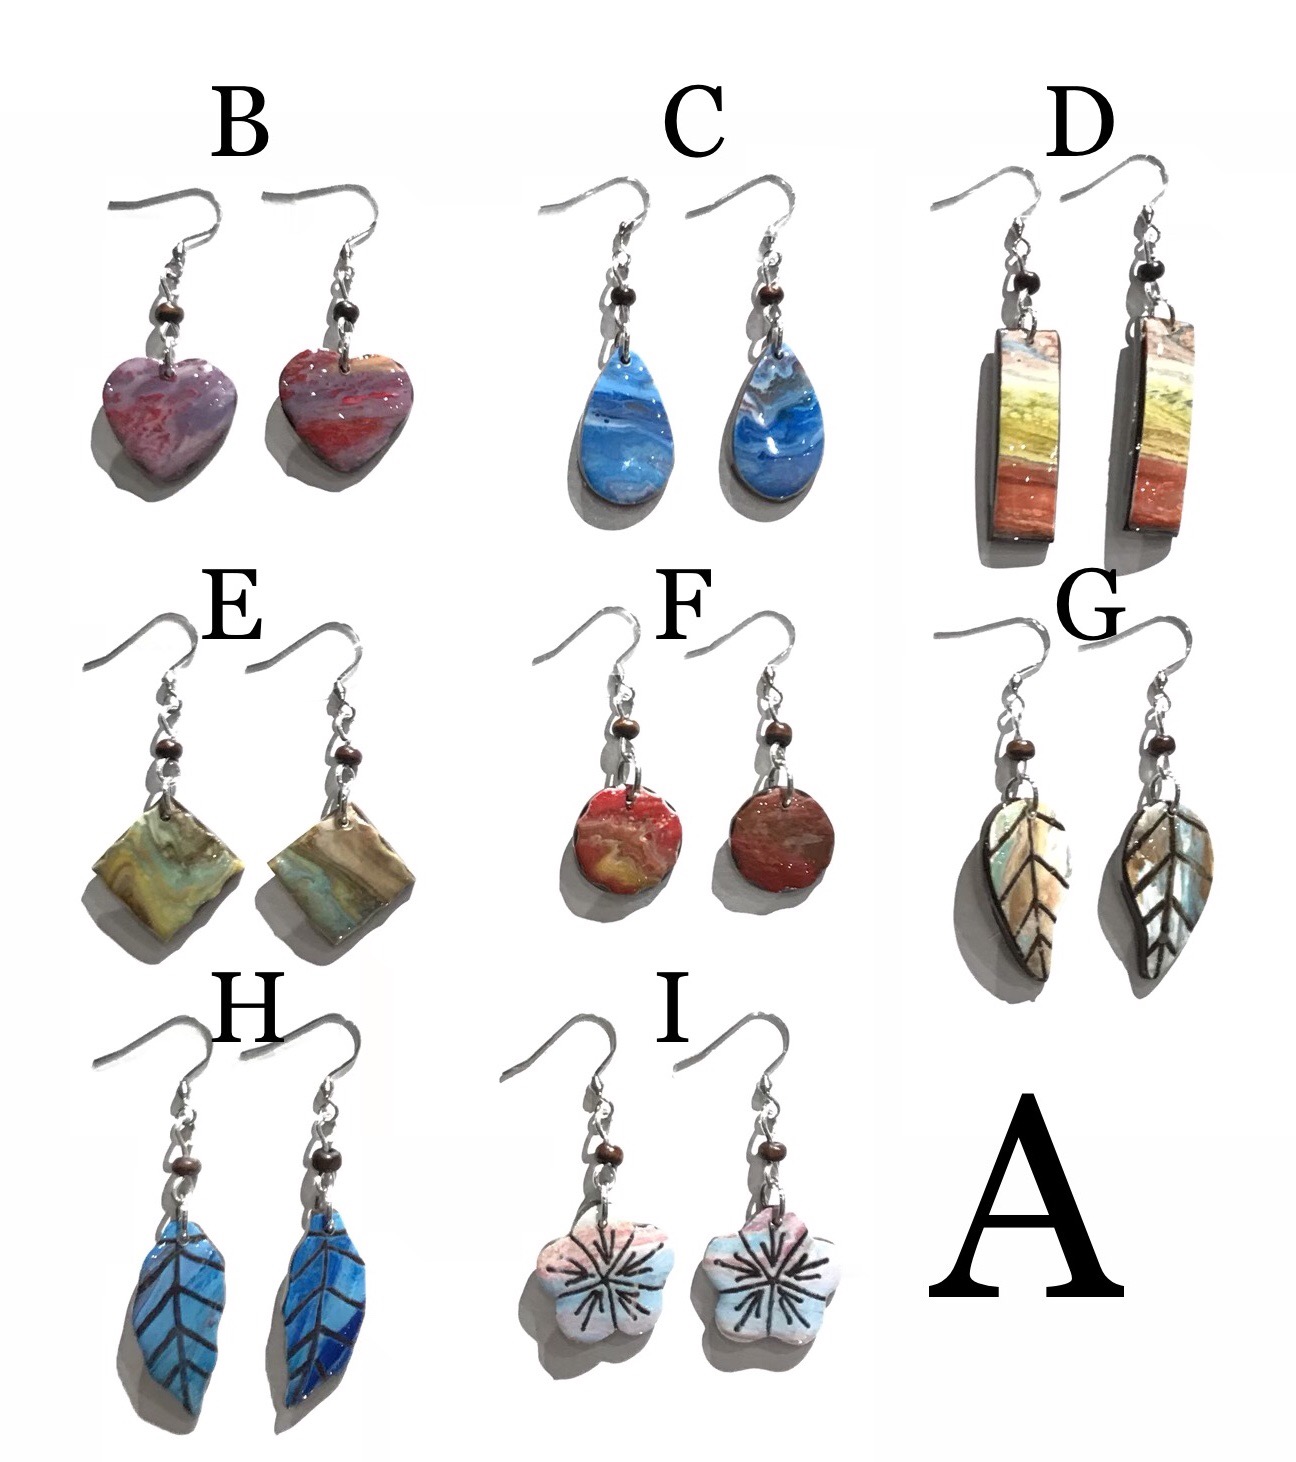 Fall Floral 4 Printed Pattern | Macrame Wooden Earring Blanks | All for Knotting Teardrop